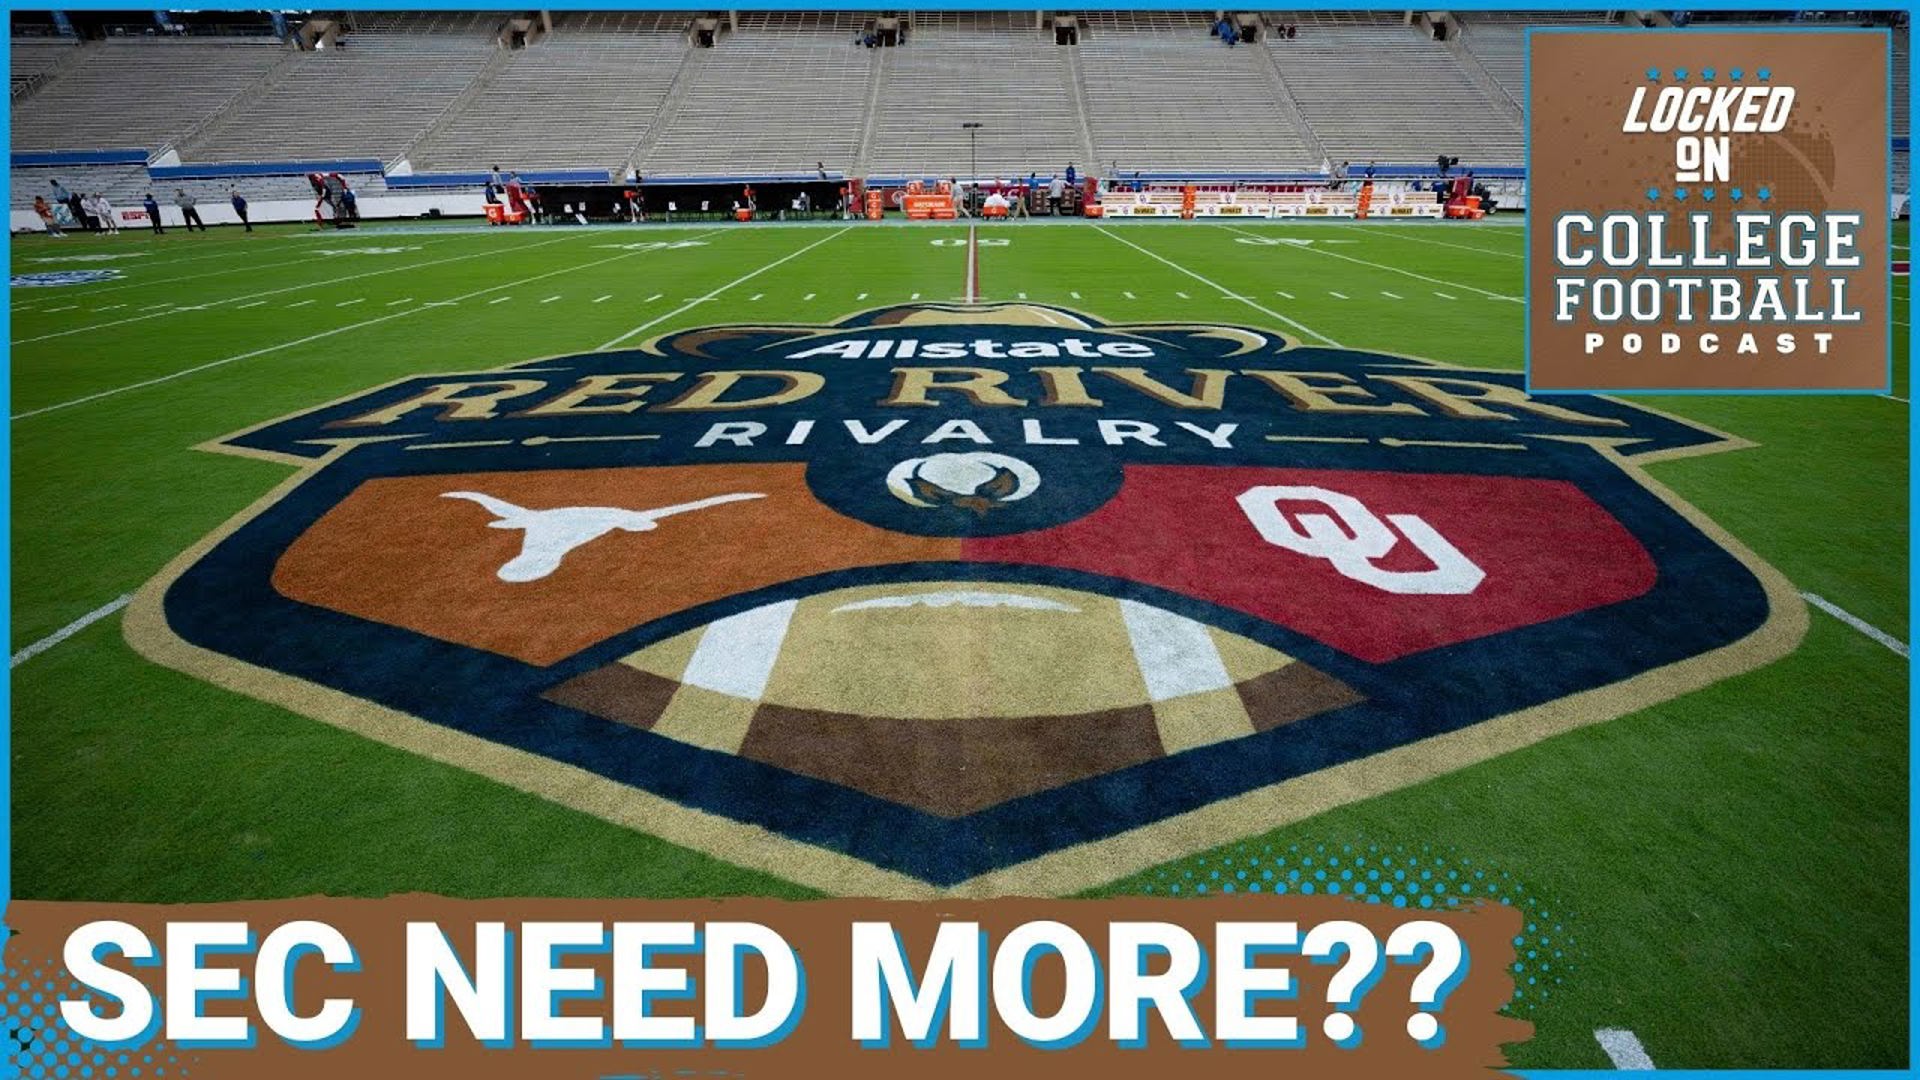 Texas and Oklahoma have officially joined the SEC ahead of this 2024 season, does their arrival mean the SEC has no need for any other schools/teams in realignment?